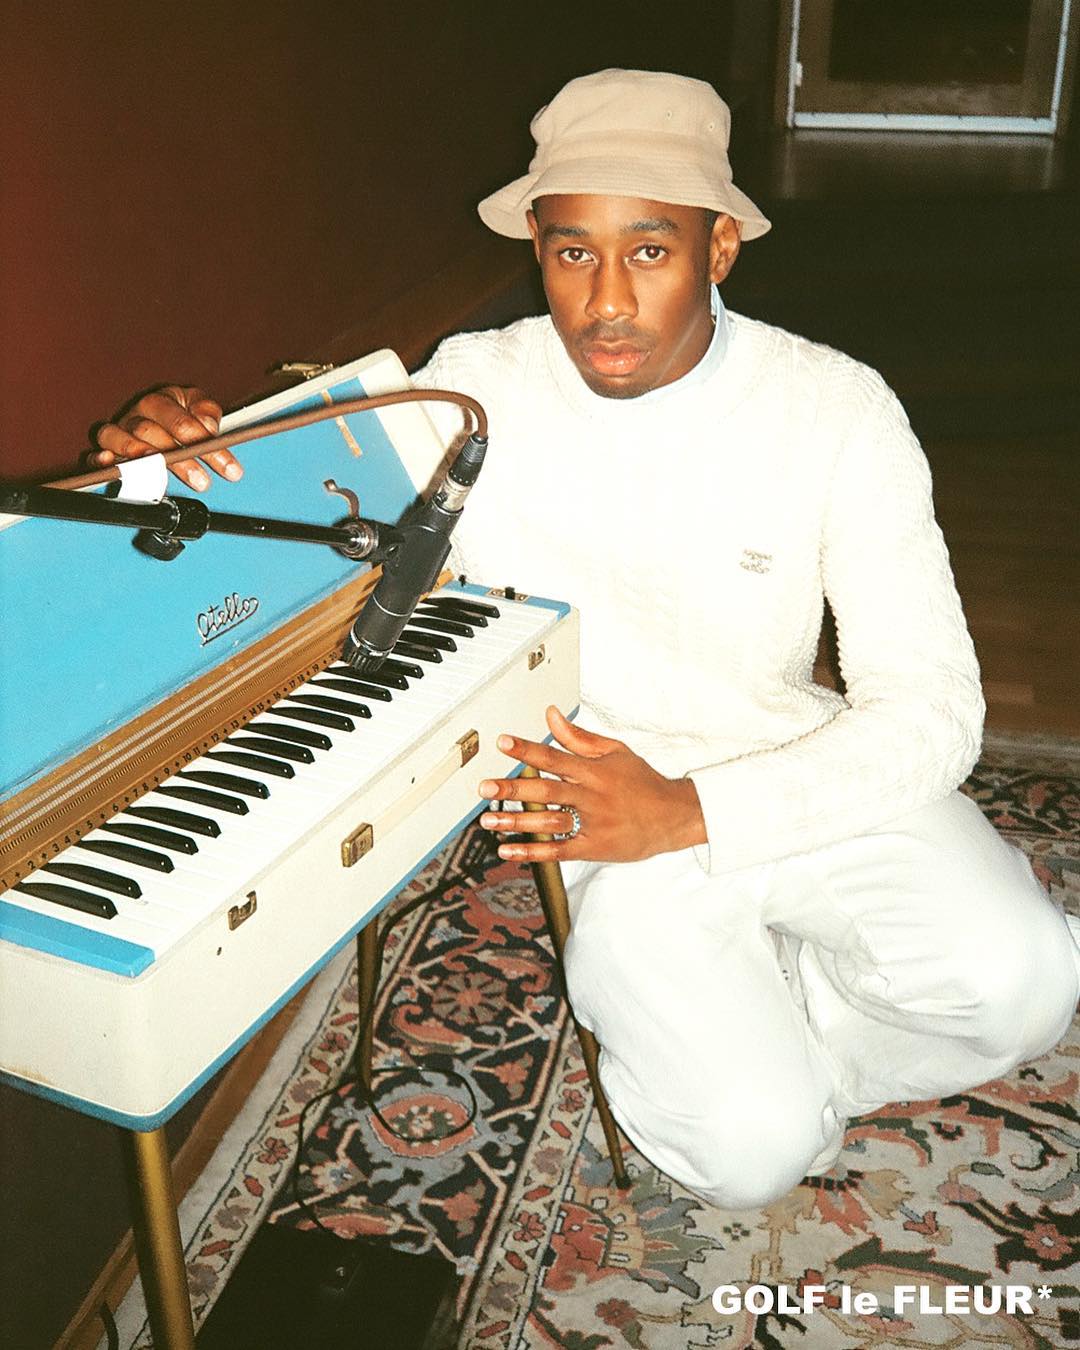 SPOTTED: Tyler, the Creator in All-White